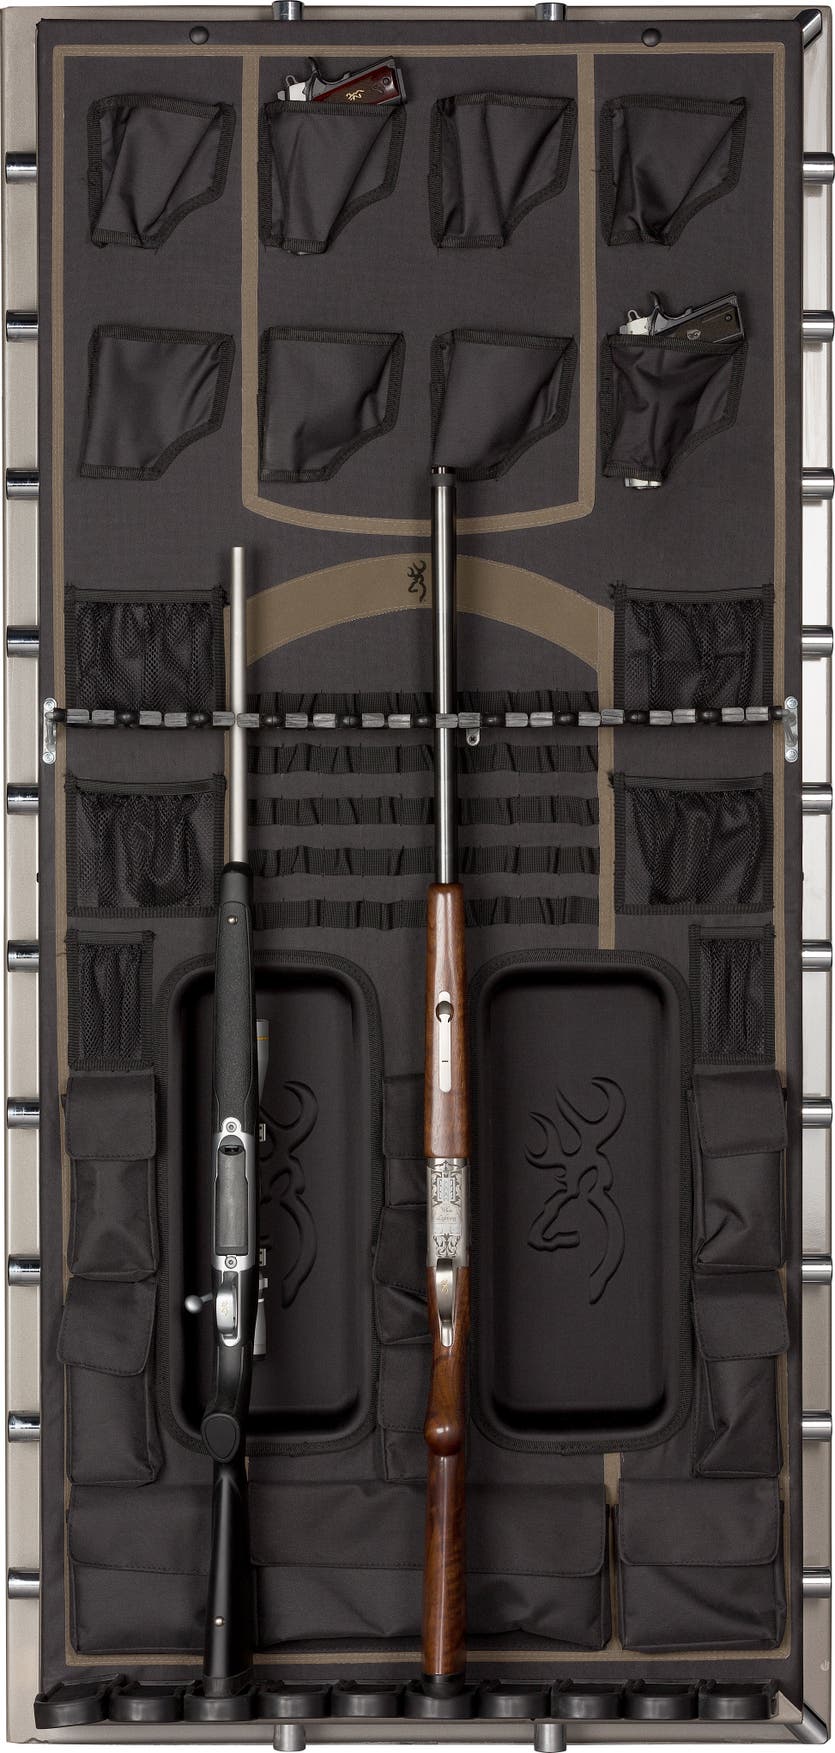 View of DPX door system with firearms on the door.